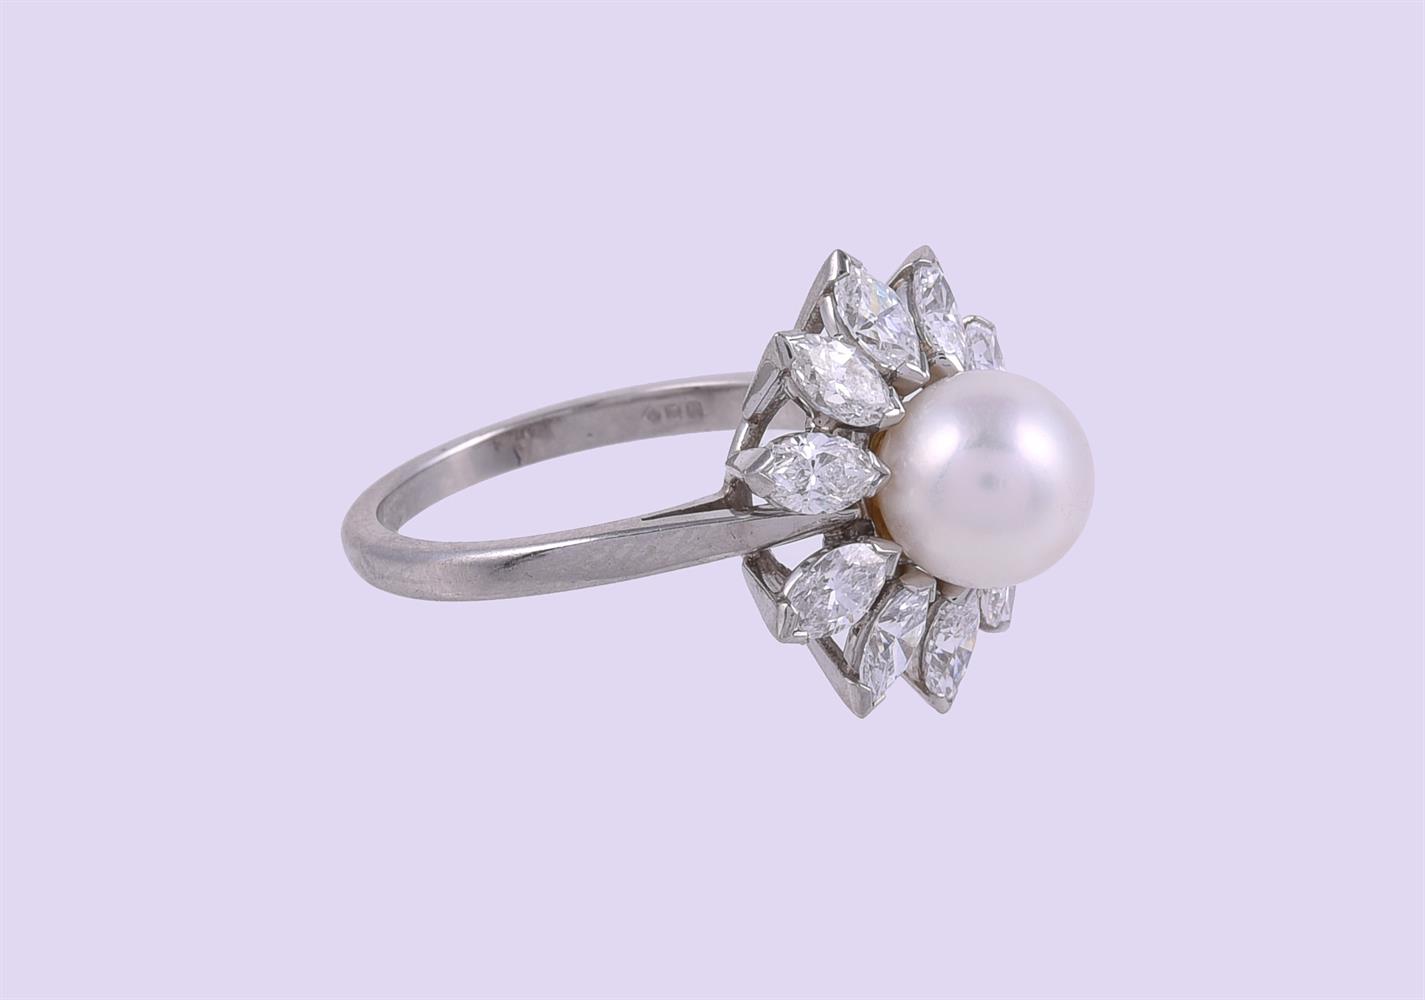 ASPREY, A PLATINUM, CULTURED PEARL AND DIAMOND CLUSTER RING, LONDON 1984 - Image 2 of 2